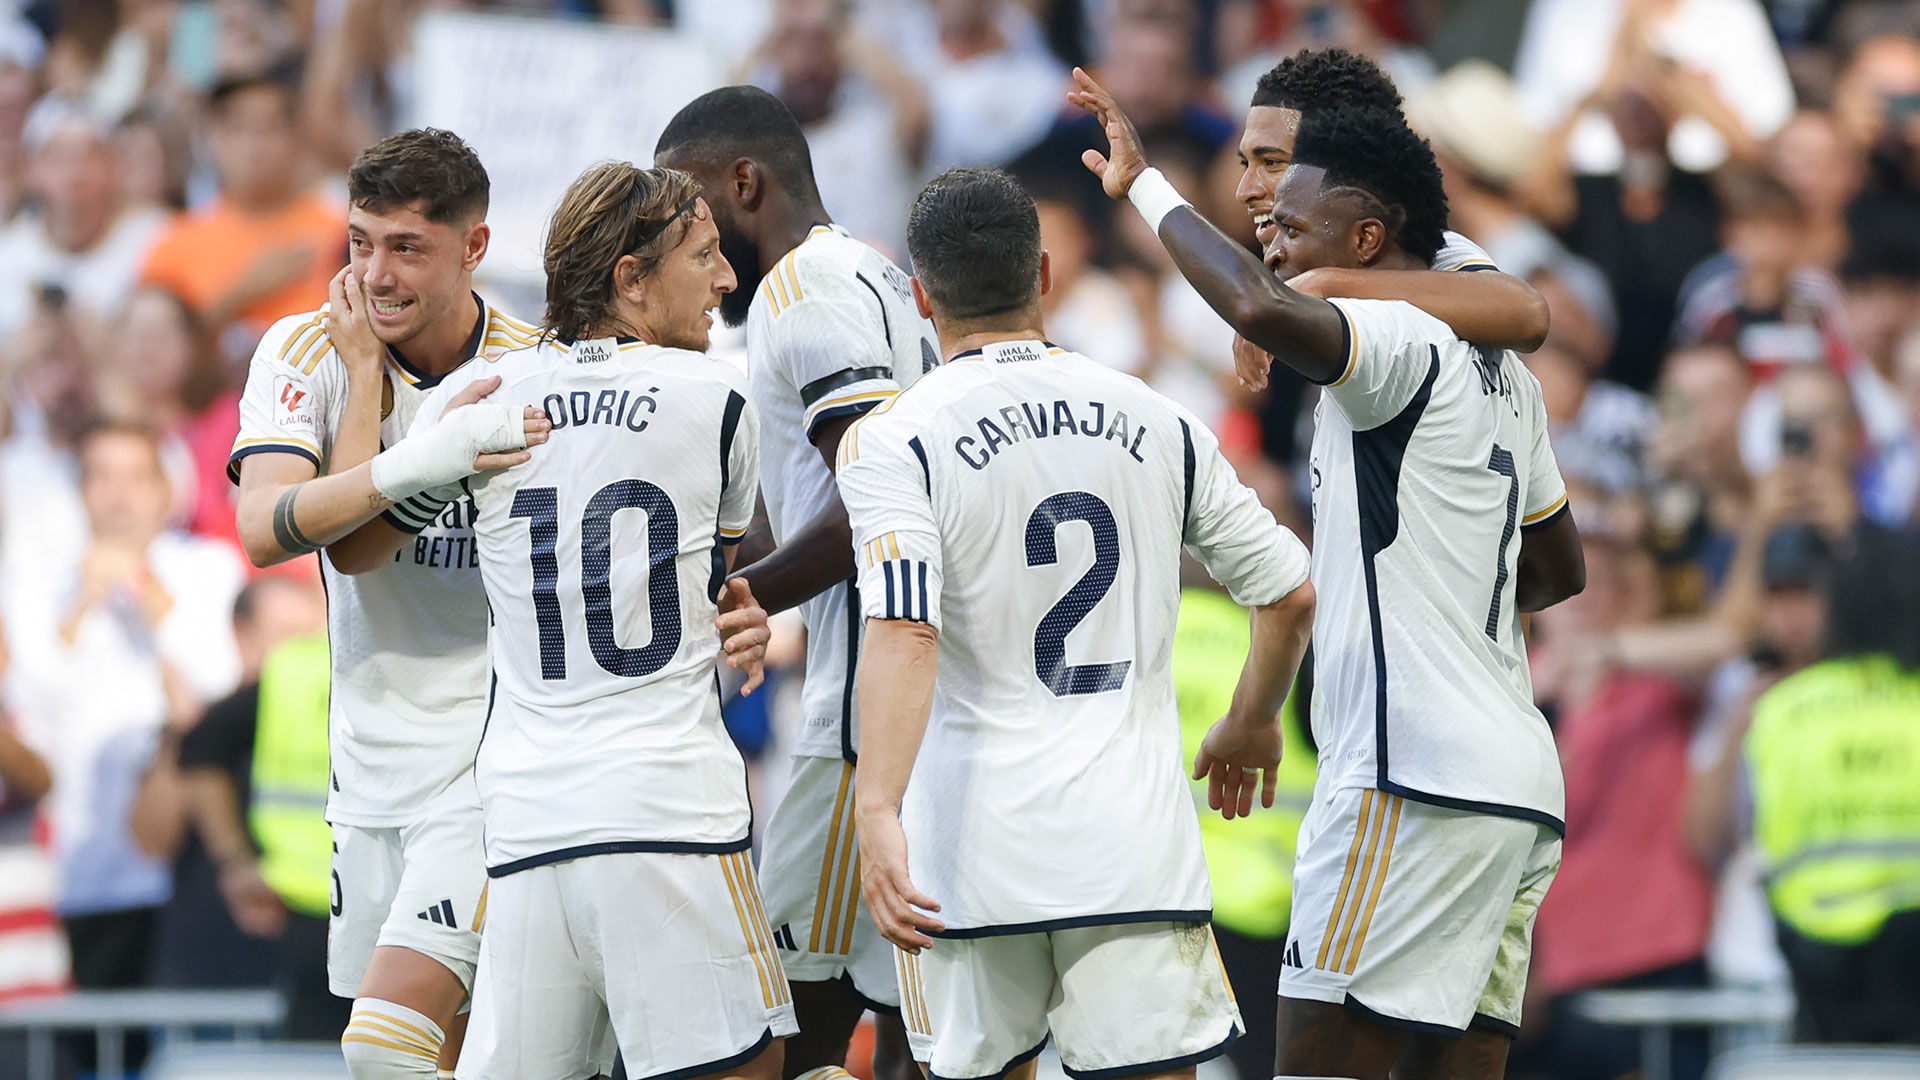 Mallorca-Real Madrid to be played on Sunday, 18 August, at 9:30 pm